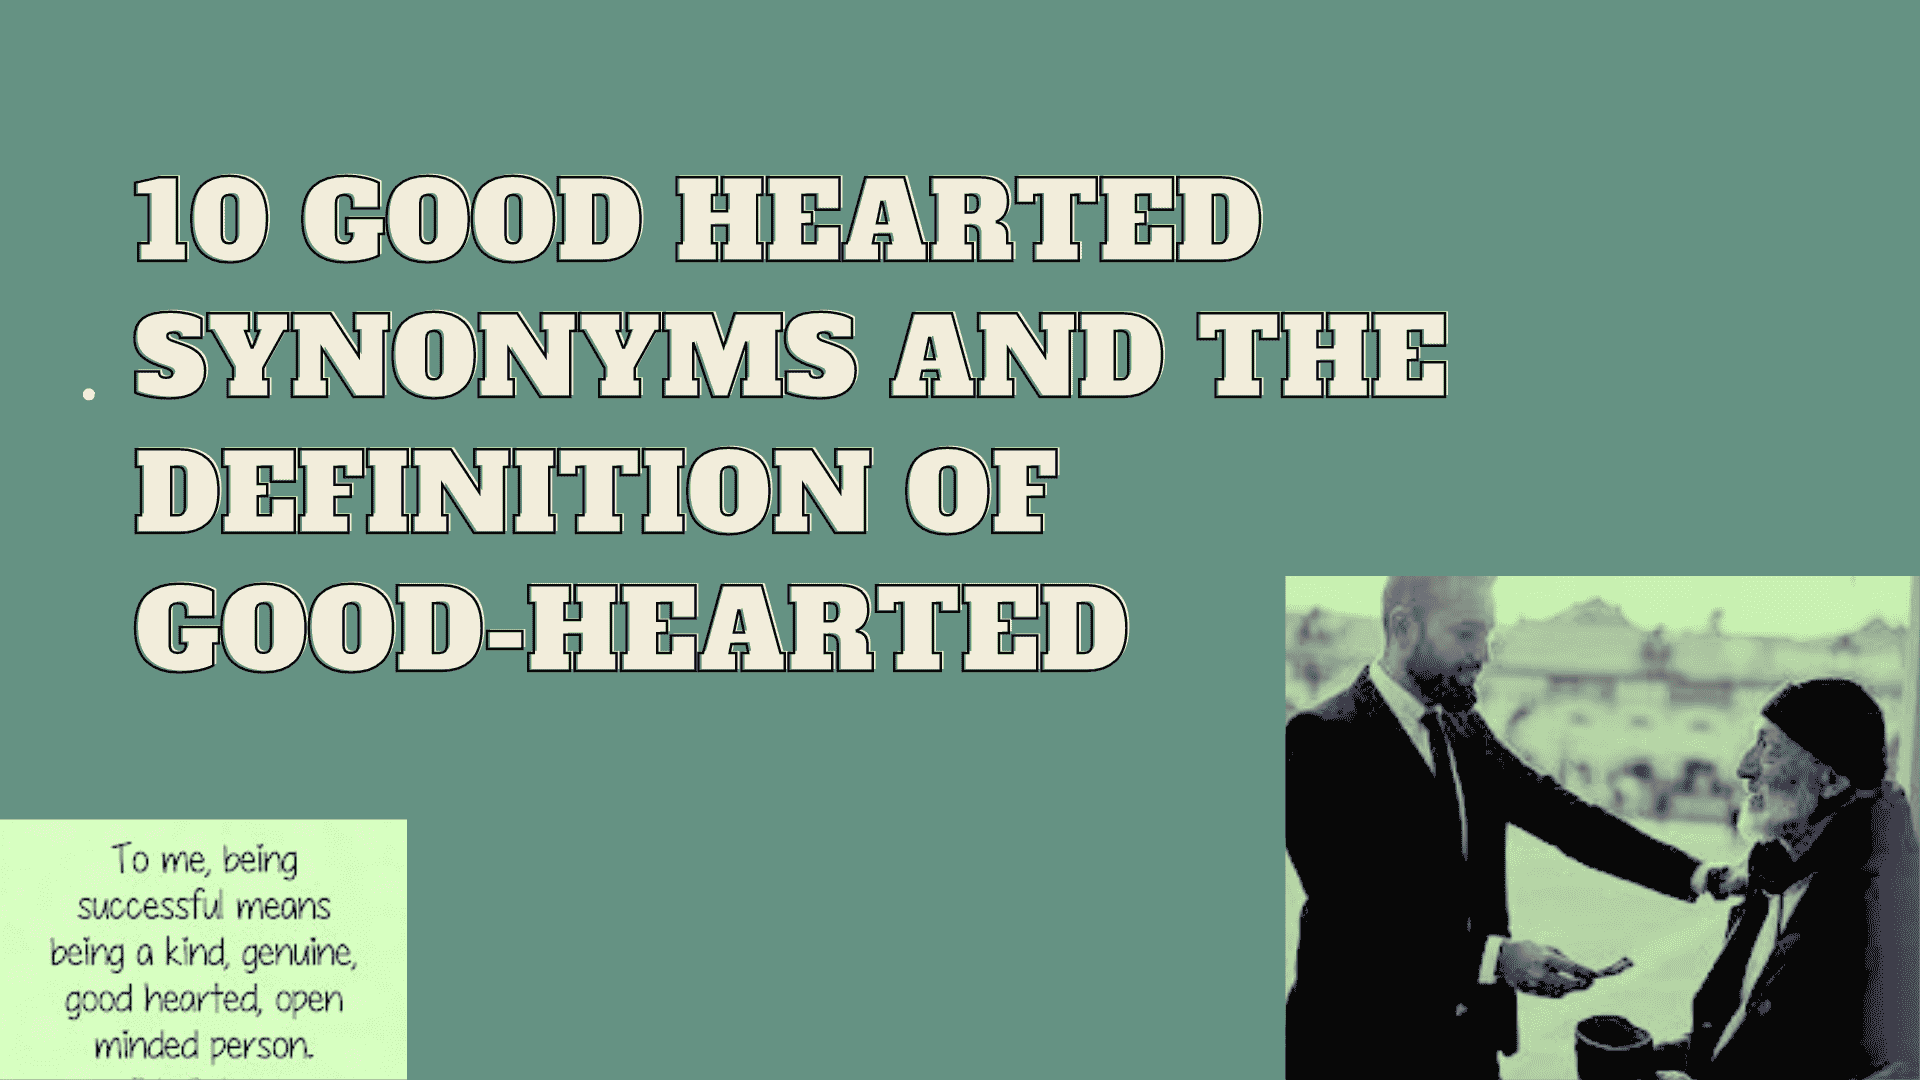 10 Good hearted synonyms and The definition of good-hearted